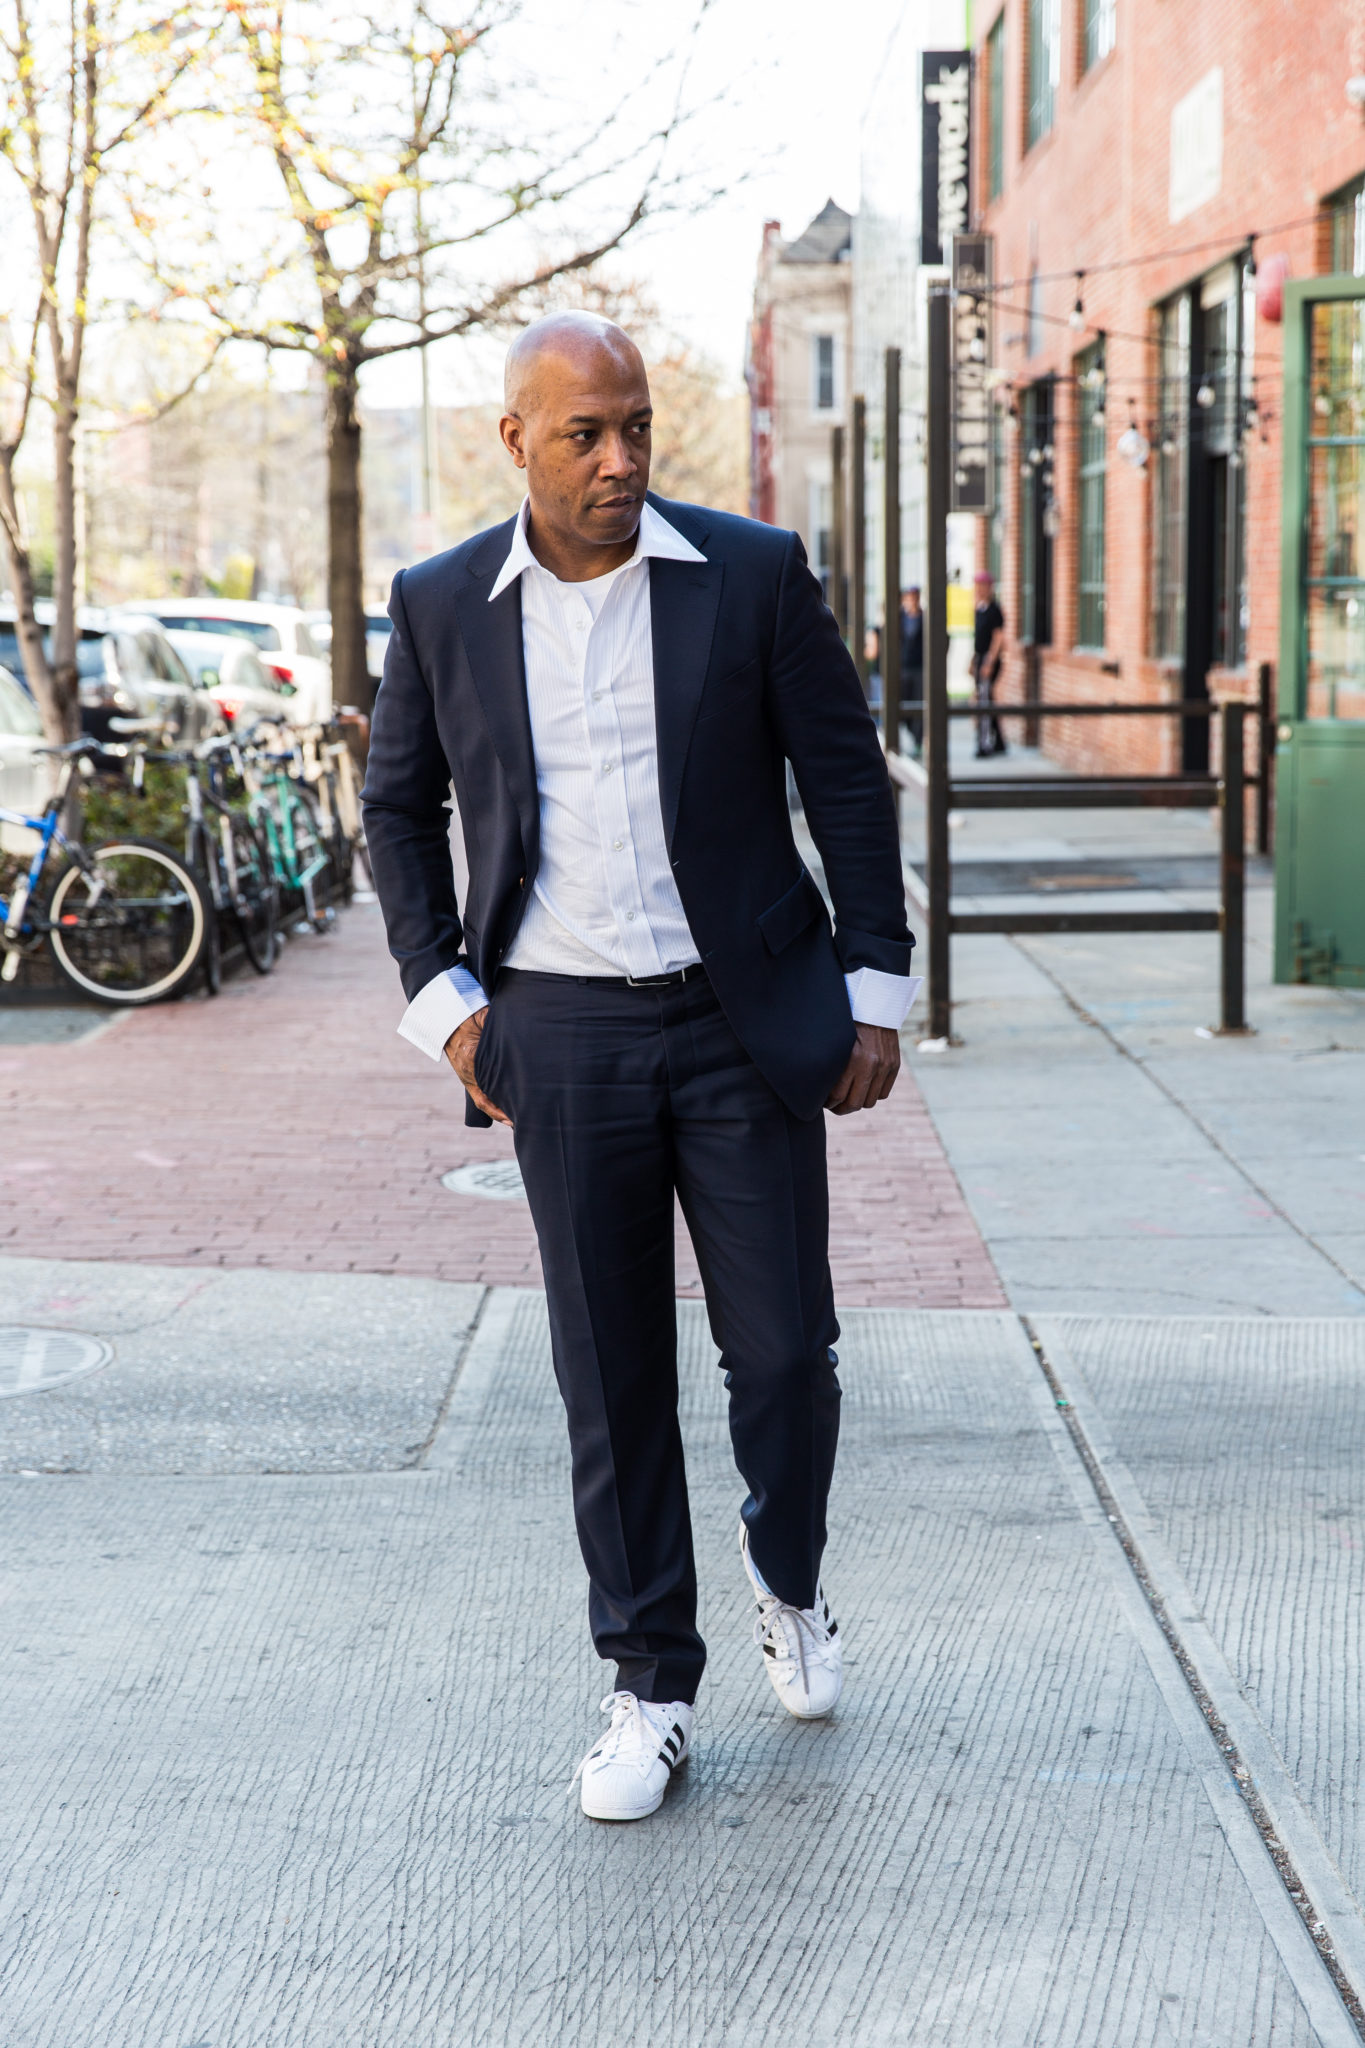 How To Dress Business Casual For Men | Wil Valor